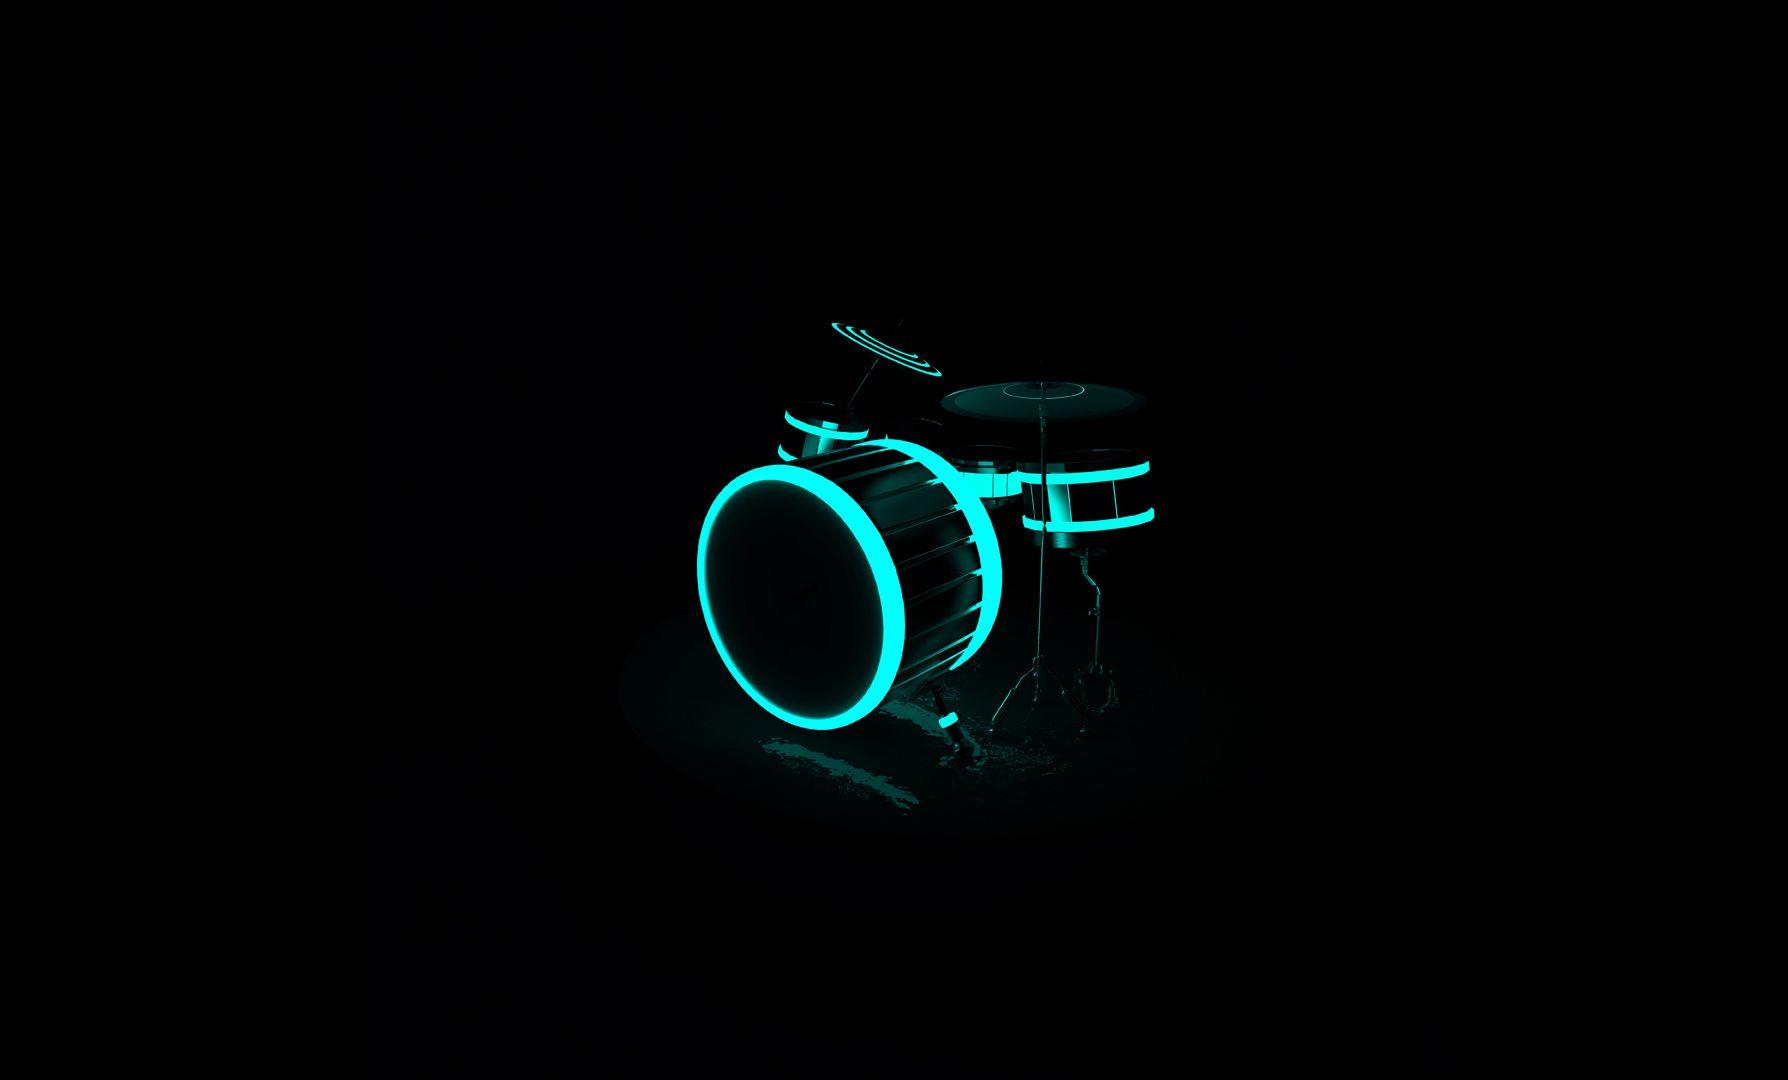 4K Drums Wallpaper High Quality